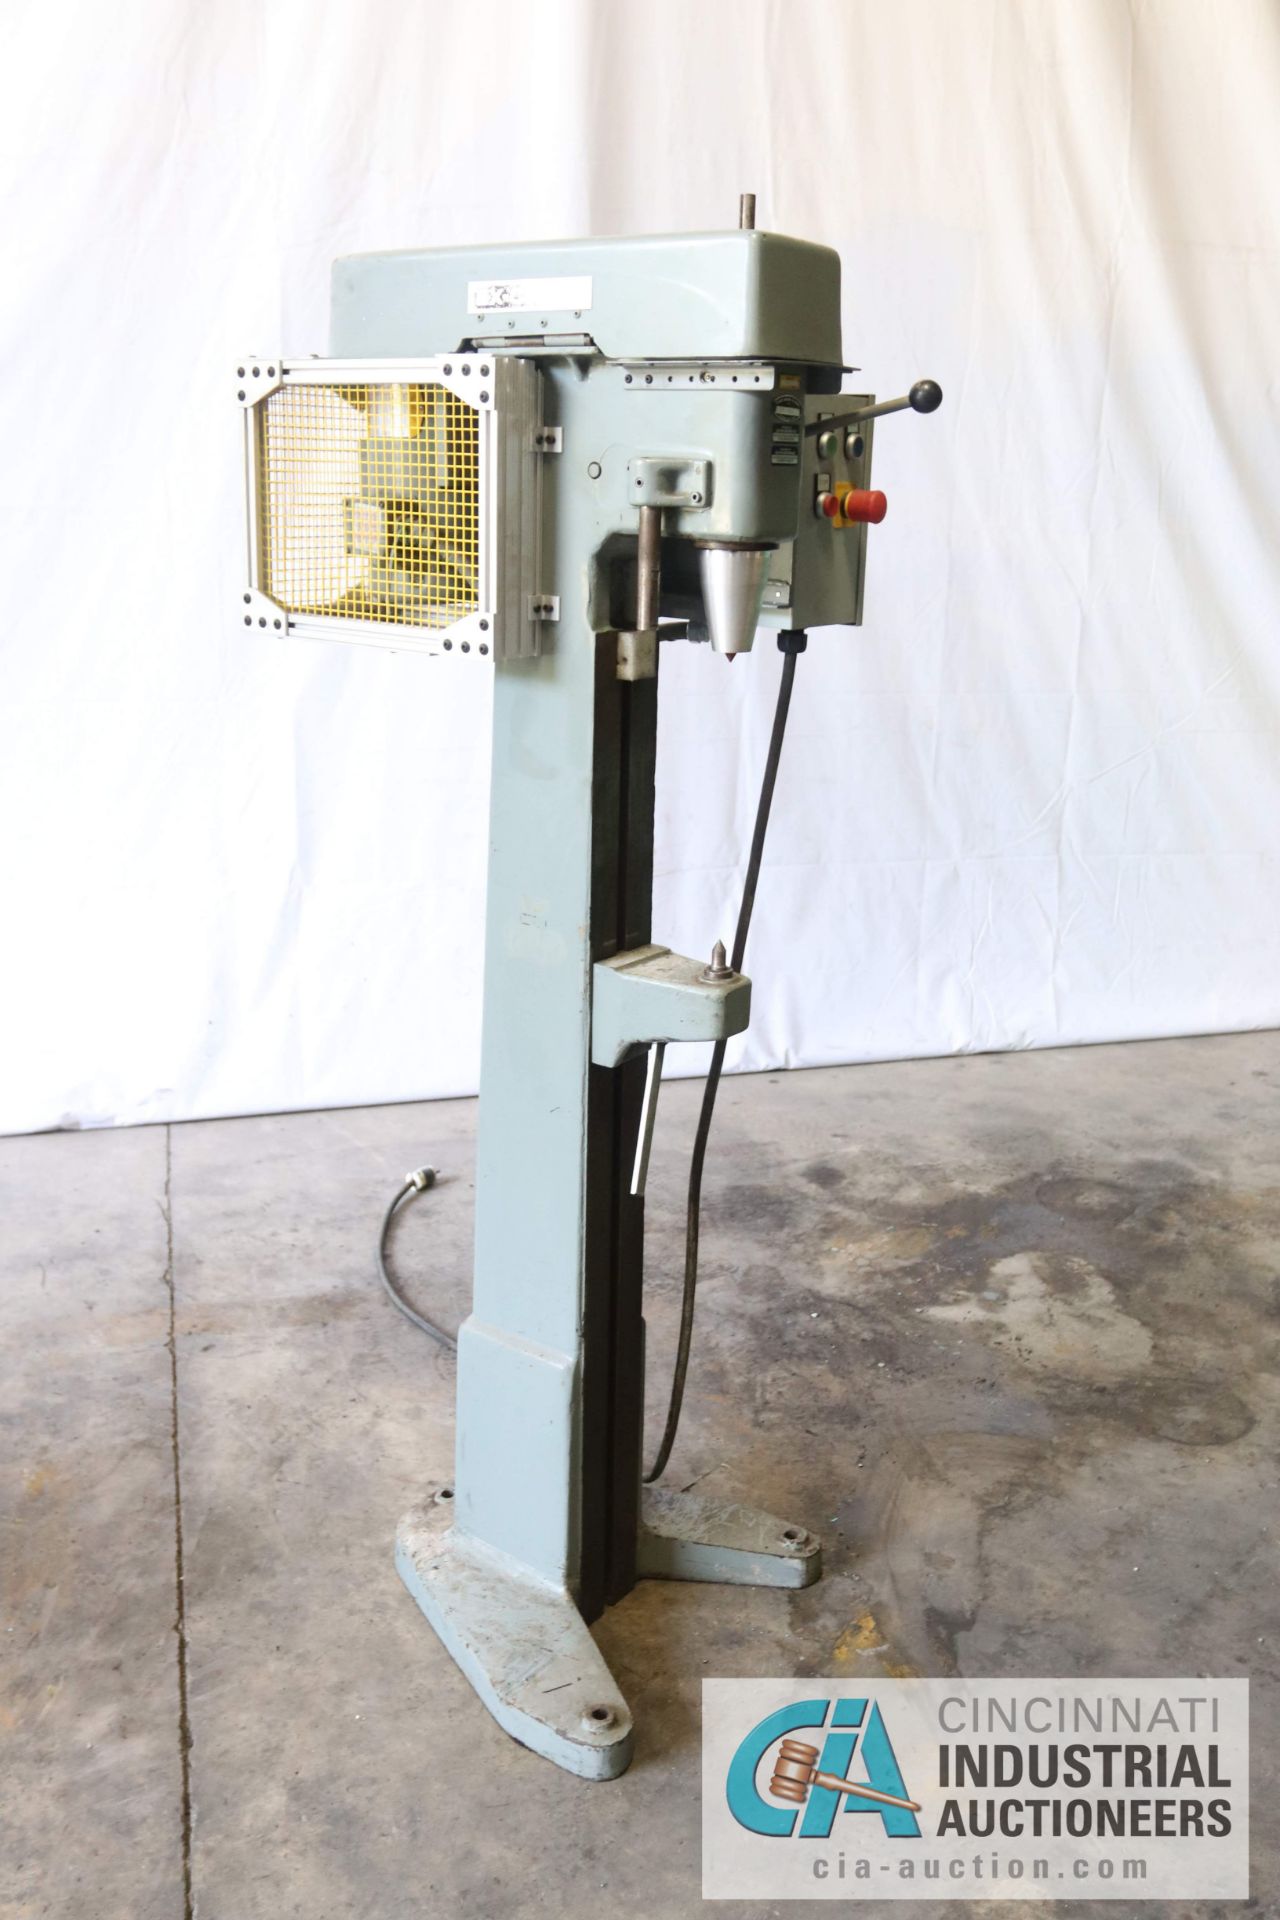 10" X 36" EXECLLO CENTER LAPPING / POLISHING MACHINE - $20.00 Rigging Fee Due to Onsite Rigger -